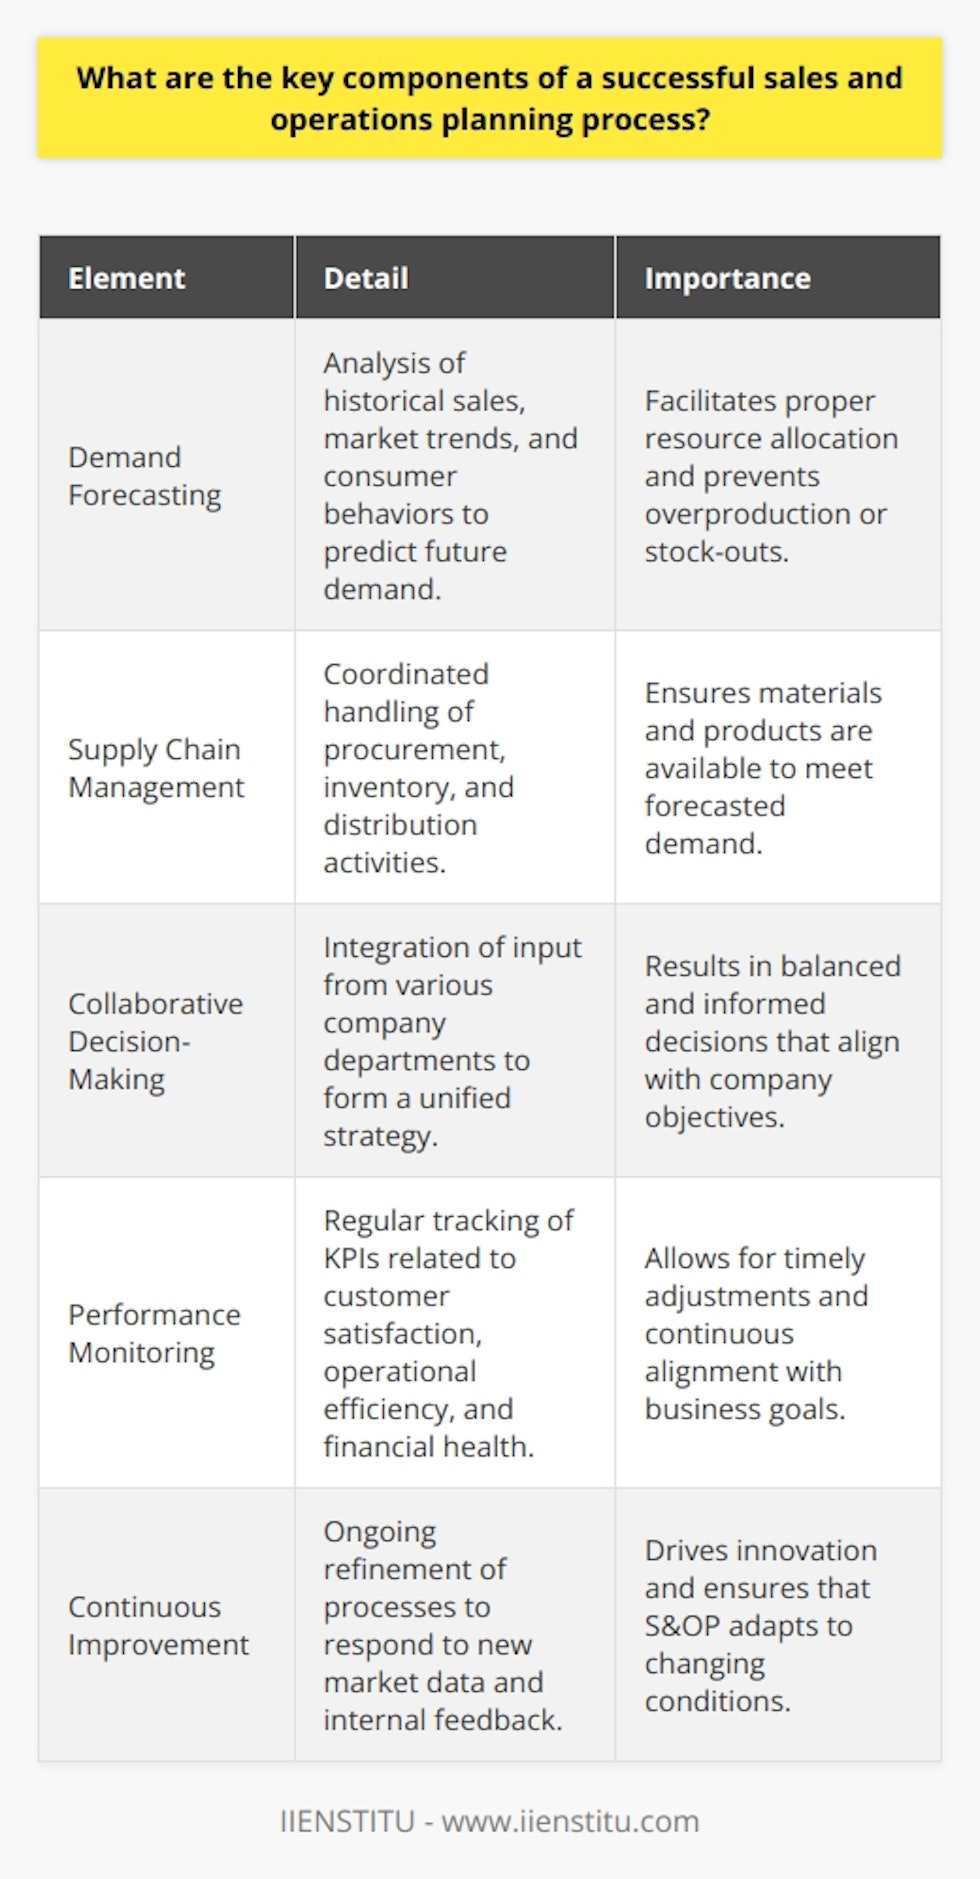 The modus operandi of adept Sales and Operations Planning (S&OP) is pivotal for enterprises seeking equilibrium between customer satisfaction and resource allocation efficiency. This process codifies a harmonious approach across various business divisions to forecast, plan, and execute business strategies while streamlining operations. The salient elements of a robust S&OP process include:1. **Demand Forecasting:** Paramount to S&OP, precise demand forecasting hinges on the scrupulous analysis of historical sales, market trajectories, and consumer propensities. As the lynchpin of resource allocation, this predictive baseline allows companies to synchronize operational capacity with market expectations, mitigating oversupply or scarcity scenarios.2. **Supply Chain Management:** A cohesive supply chain is indispensable for seamless S&OP implementation. Hermetic coordination across purchasing, stocking, and distribution is essential. Companies must ensure raw materials and logistical frameworks are poised to satiate forecasted demand, safeguarding against inventory shortfall or detrimental stagnation.3. **Collaborative Decision-Making:** In the S&OP milieu, synergy is non-negotiable. Engaging multifarious stakeholders - from the marketing gurus to the financial mavens and operational tacticians - is crucial. This confluence of expertise ensures that all decisions are robust, reconciled, and resolute, establishing a unanimous action strategy.4. **Performance Monitoring:** Vigilance in monitoring Key Performance Indicators (KPIs) – spanning customer satisfaction indices, operational finesse, and fiscal robustness – offers an introspective lens. It helps in pinpointing deviations, facilitating plan recalibration, and propelling the business toward its stated goals.5. **Continuous Improvement:** Stagnation is the antithesis of success in S&OP. A culture that venerates perpetual enhancement ensures that the S&OP cycle is ever-evolving, responsive, and attuned to the latest market pulse or internal process upgrades.To encapsulate, the S&OP process is a tapestry woven from the threads of demand insight, supply chain synchronization, interdepartmental communion, performance scrutiny, and relentless progression. In adhering to these pillars, organizations not only achieve operational acumen but also carve a trajectory towards long-term strategic prosperity.